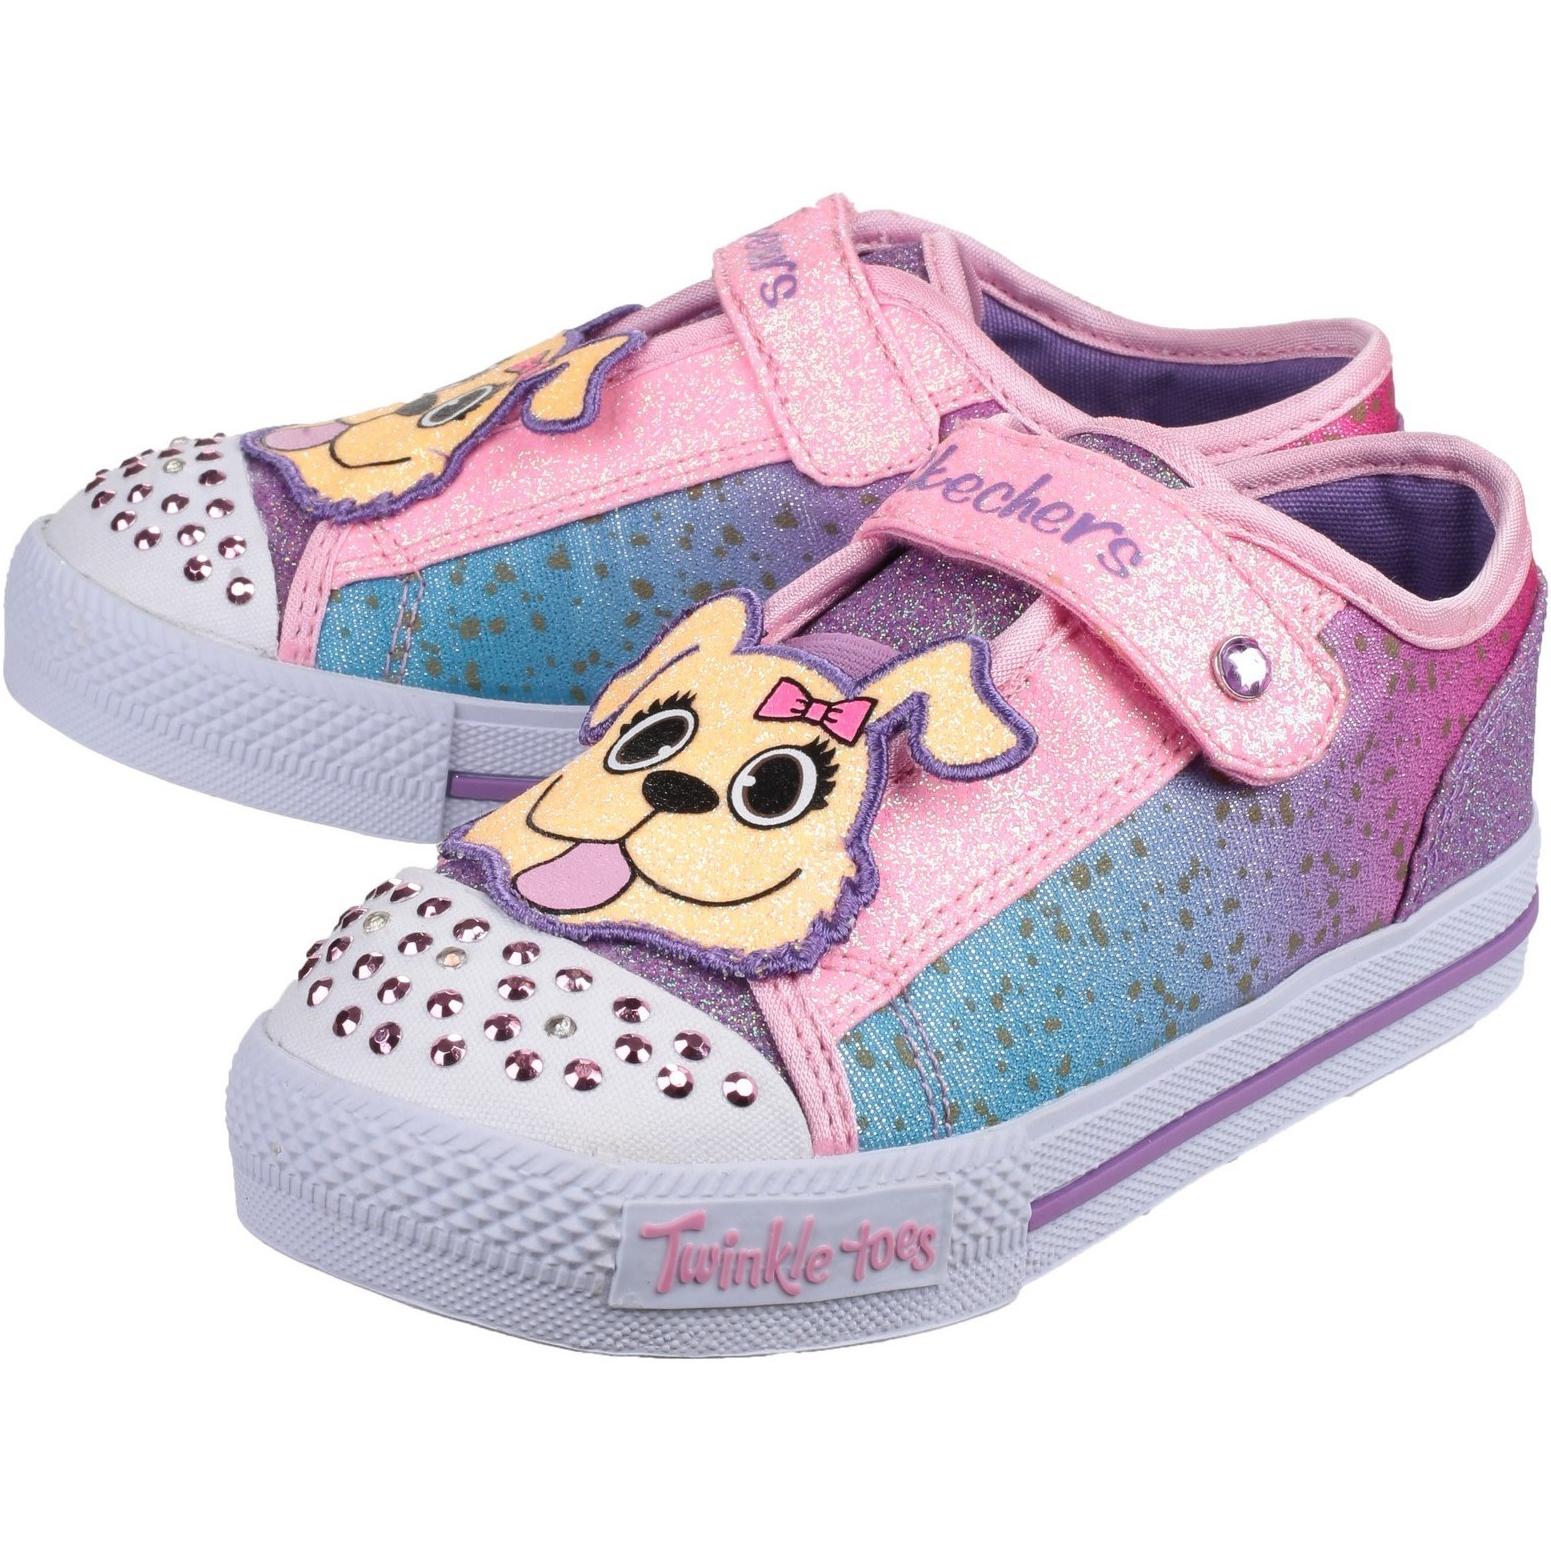 Skechers Shuffles - Play Dates Trainers